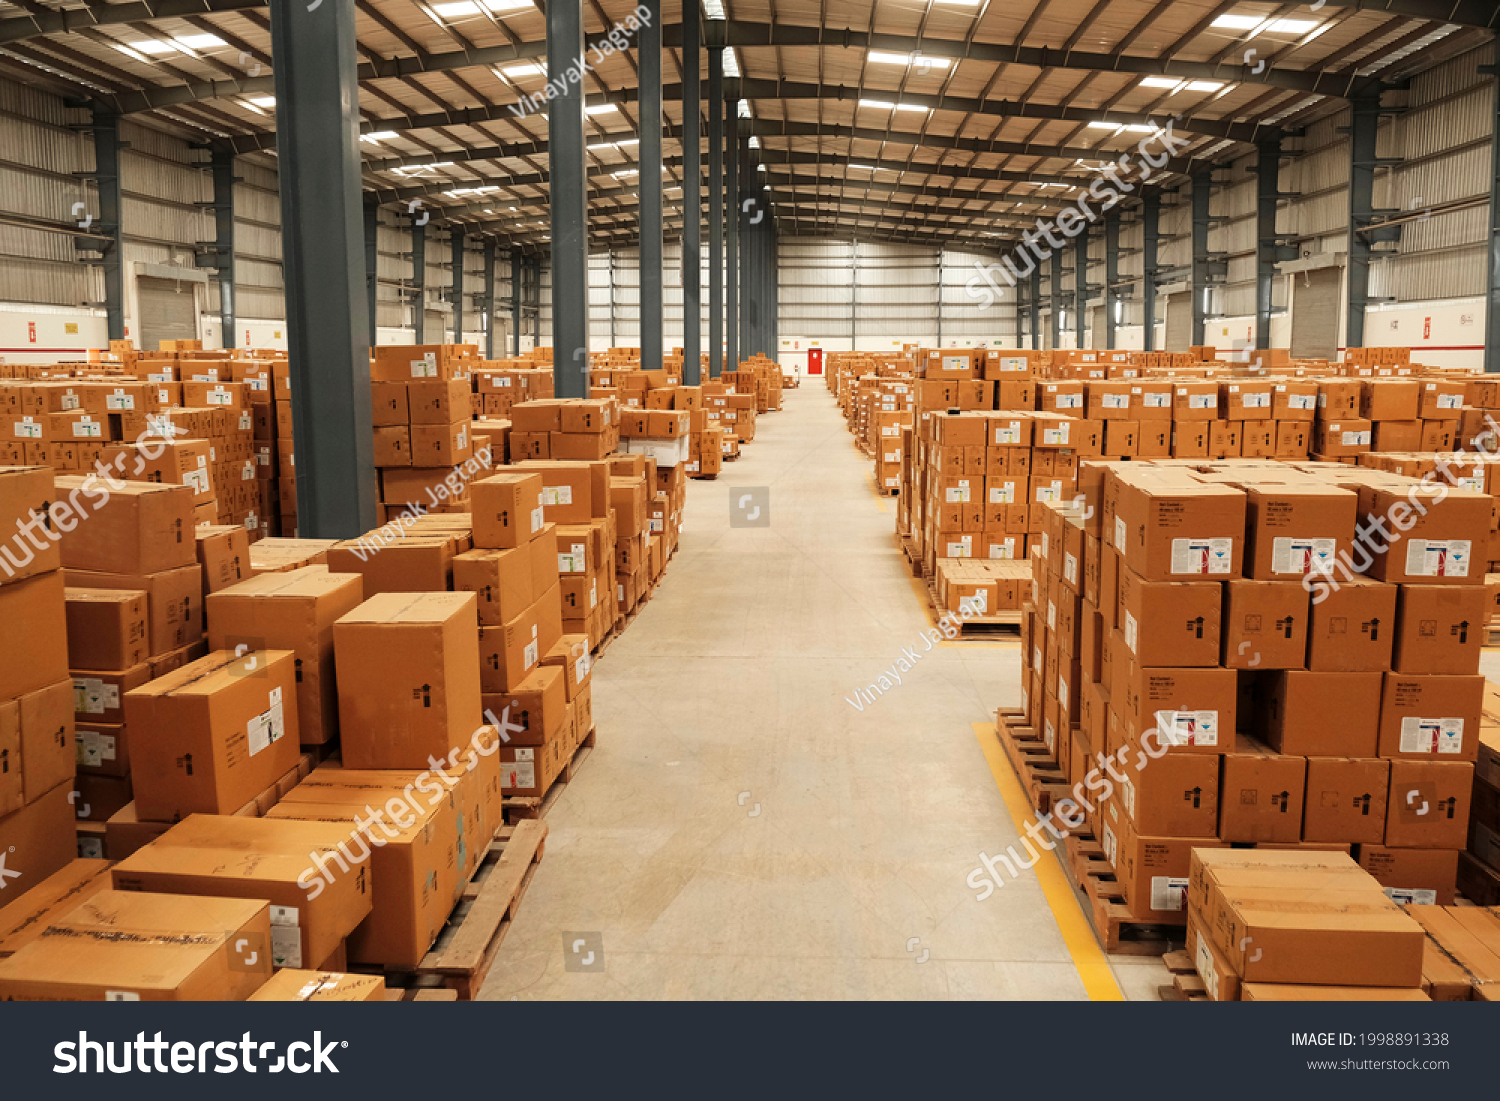 Warehouse, package shipment, freight transportation and delivery concept, cardboard boxes on pallet. #1998891338